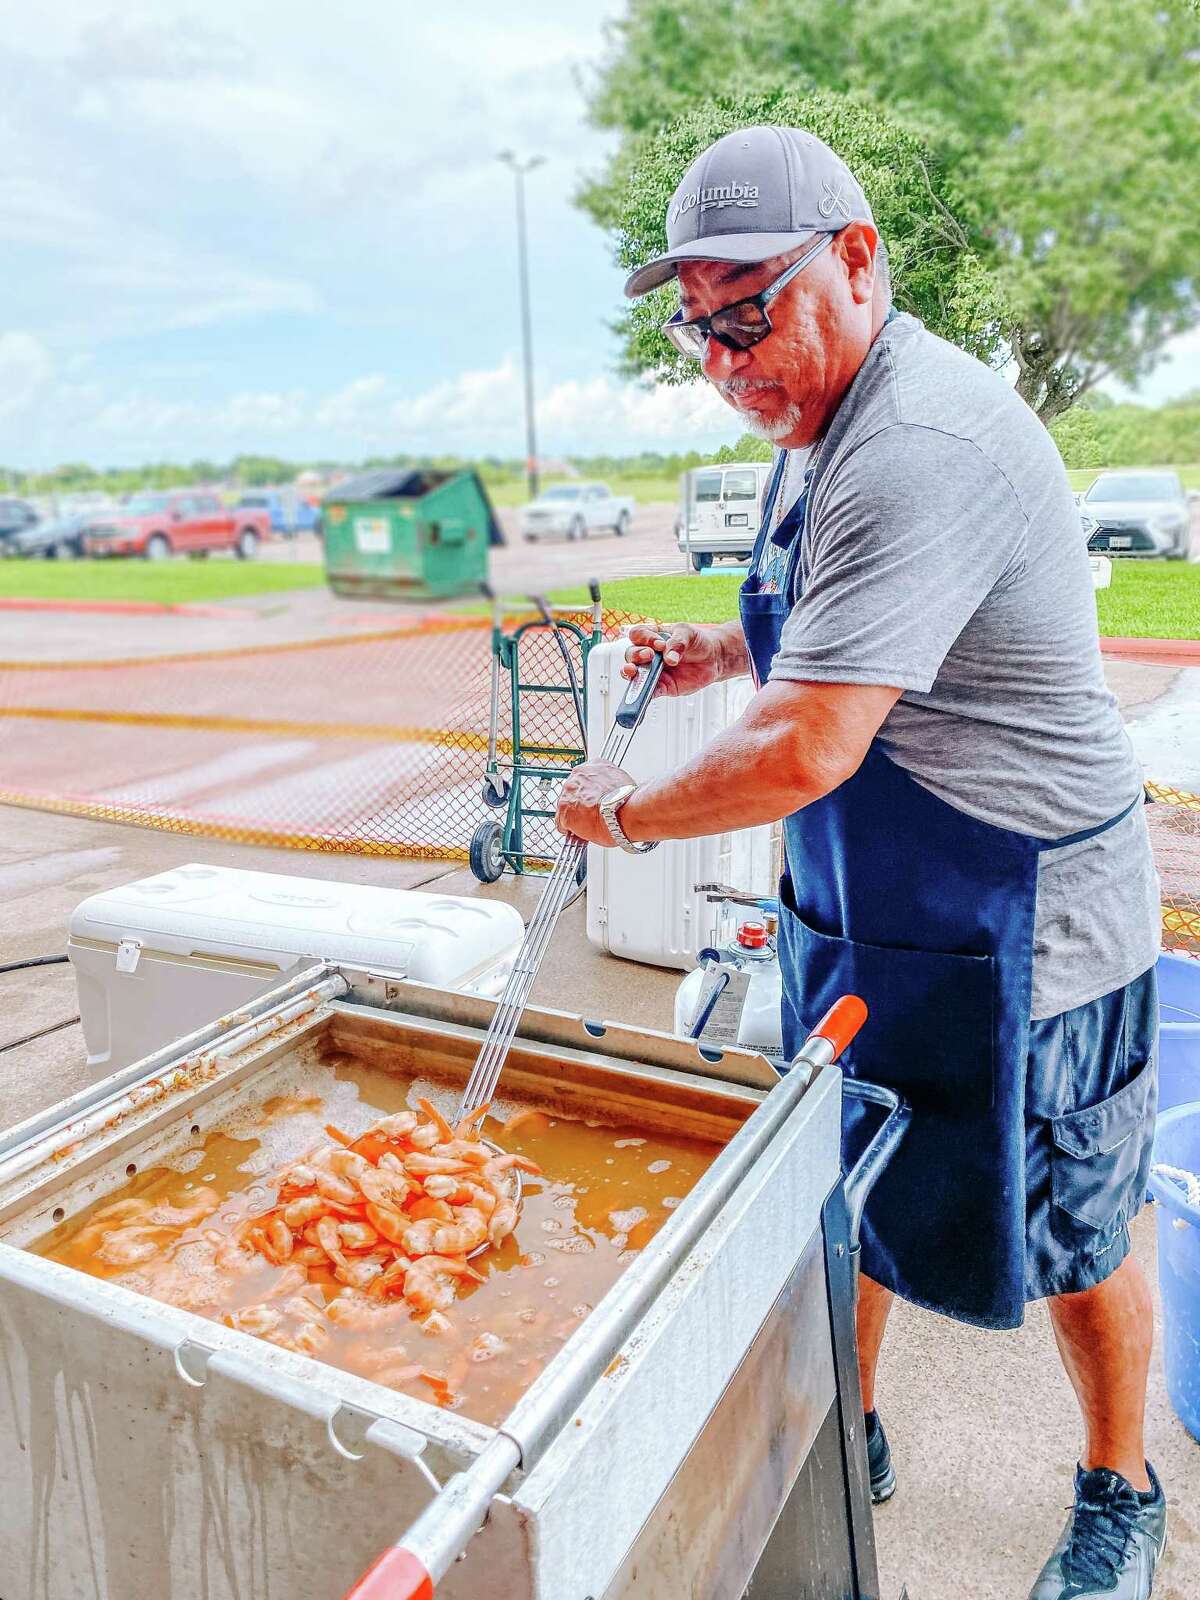 The Rose’s 33rd Annual Shrimp Boil and Fundraiser is slated for Saturday, June 18 at the Pasadena Convention Center. The event will raise funds to support breast health care services across Southeast Texas. Here, a member of The Rose Cooking Team boils shrimp at the 2021 event.